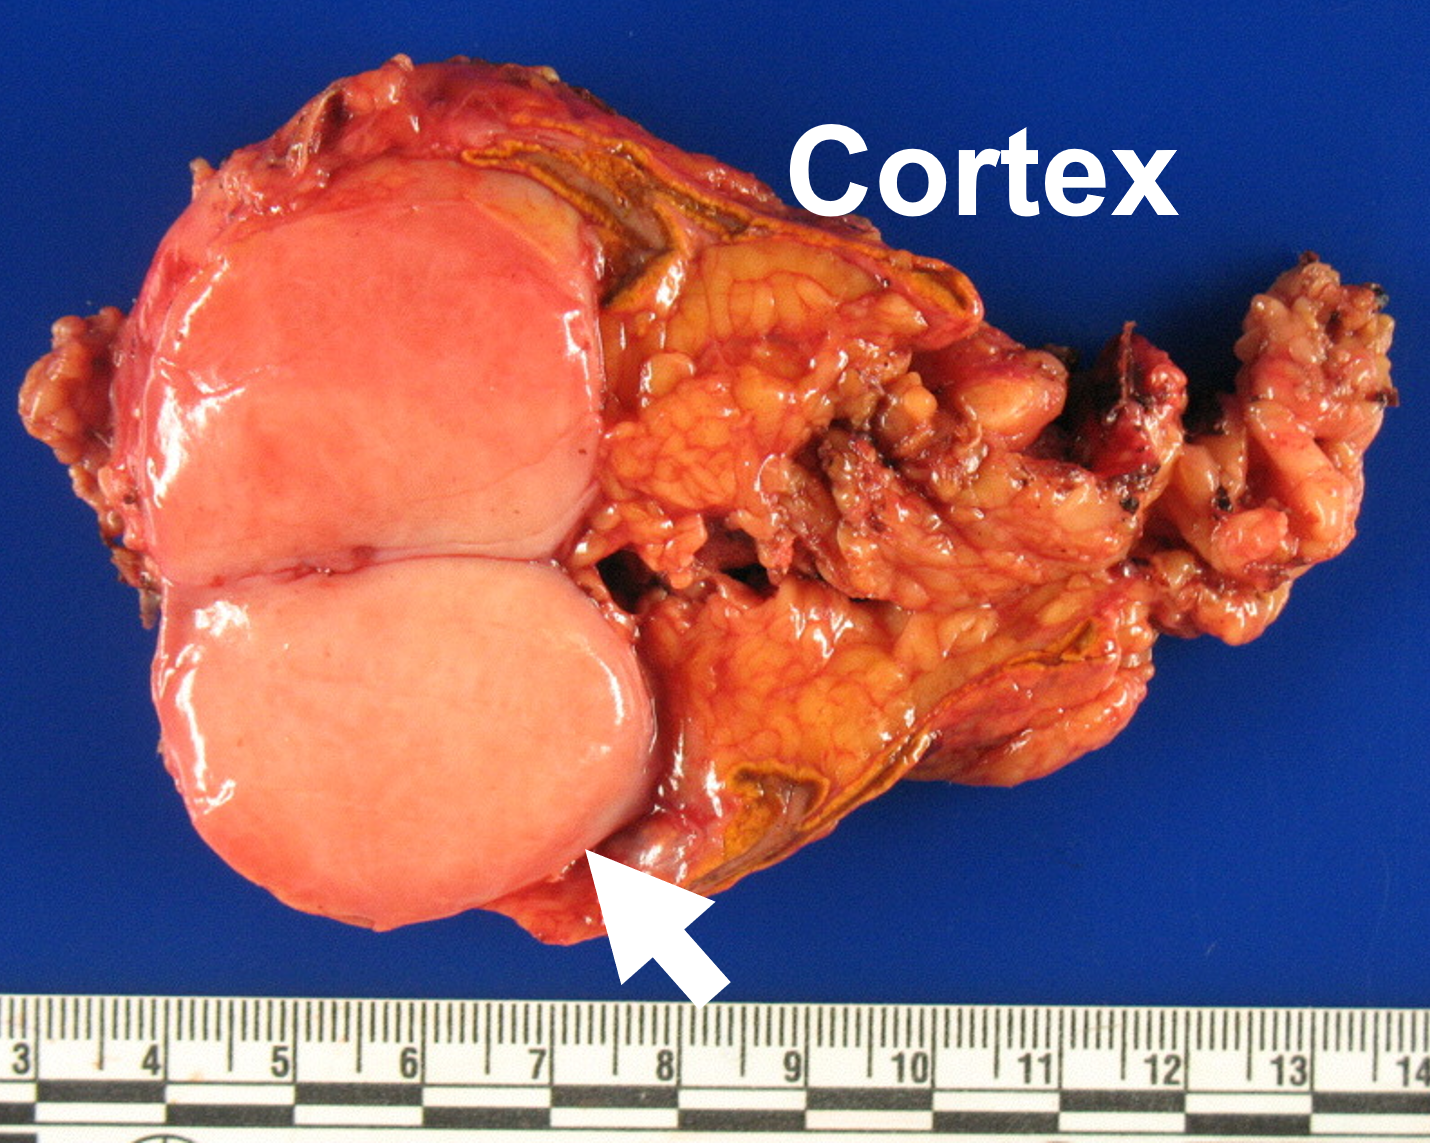 Adrenal metastasis from stage 4 lung cancer (Non-small cell lung cancer; NSCLC; arrow) arising in the normal adrenal cortex.